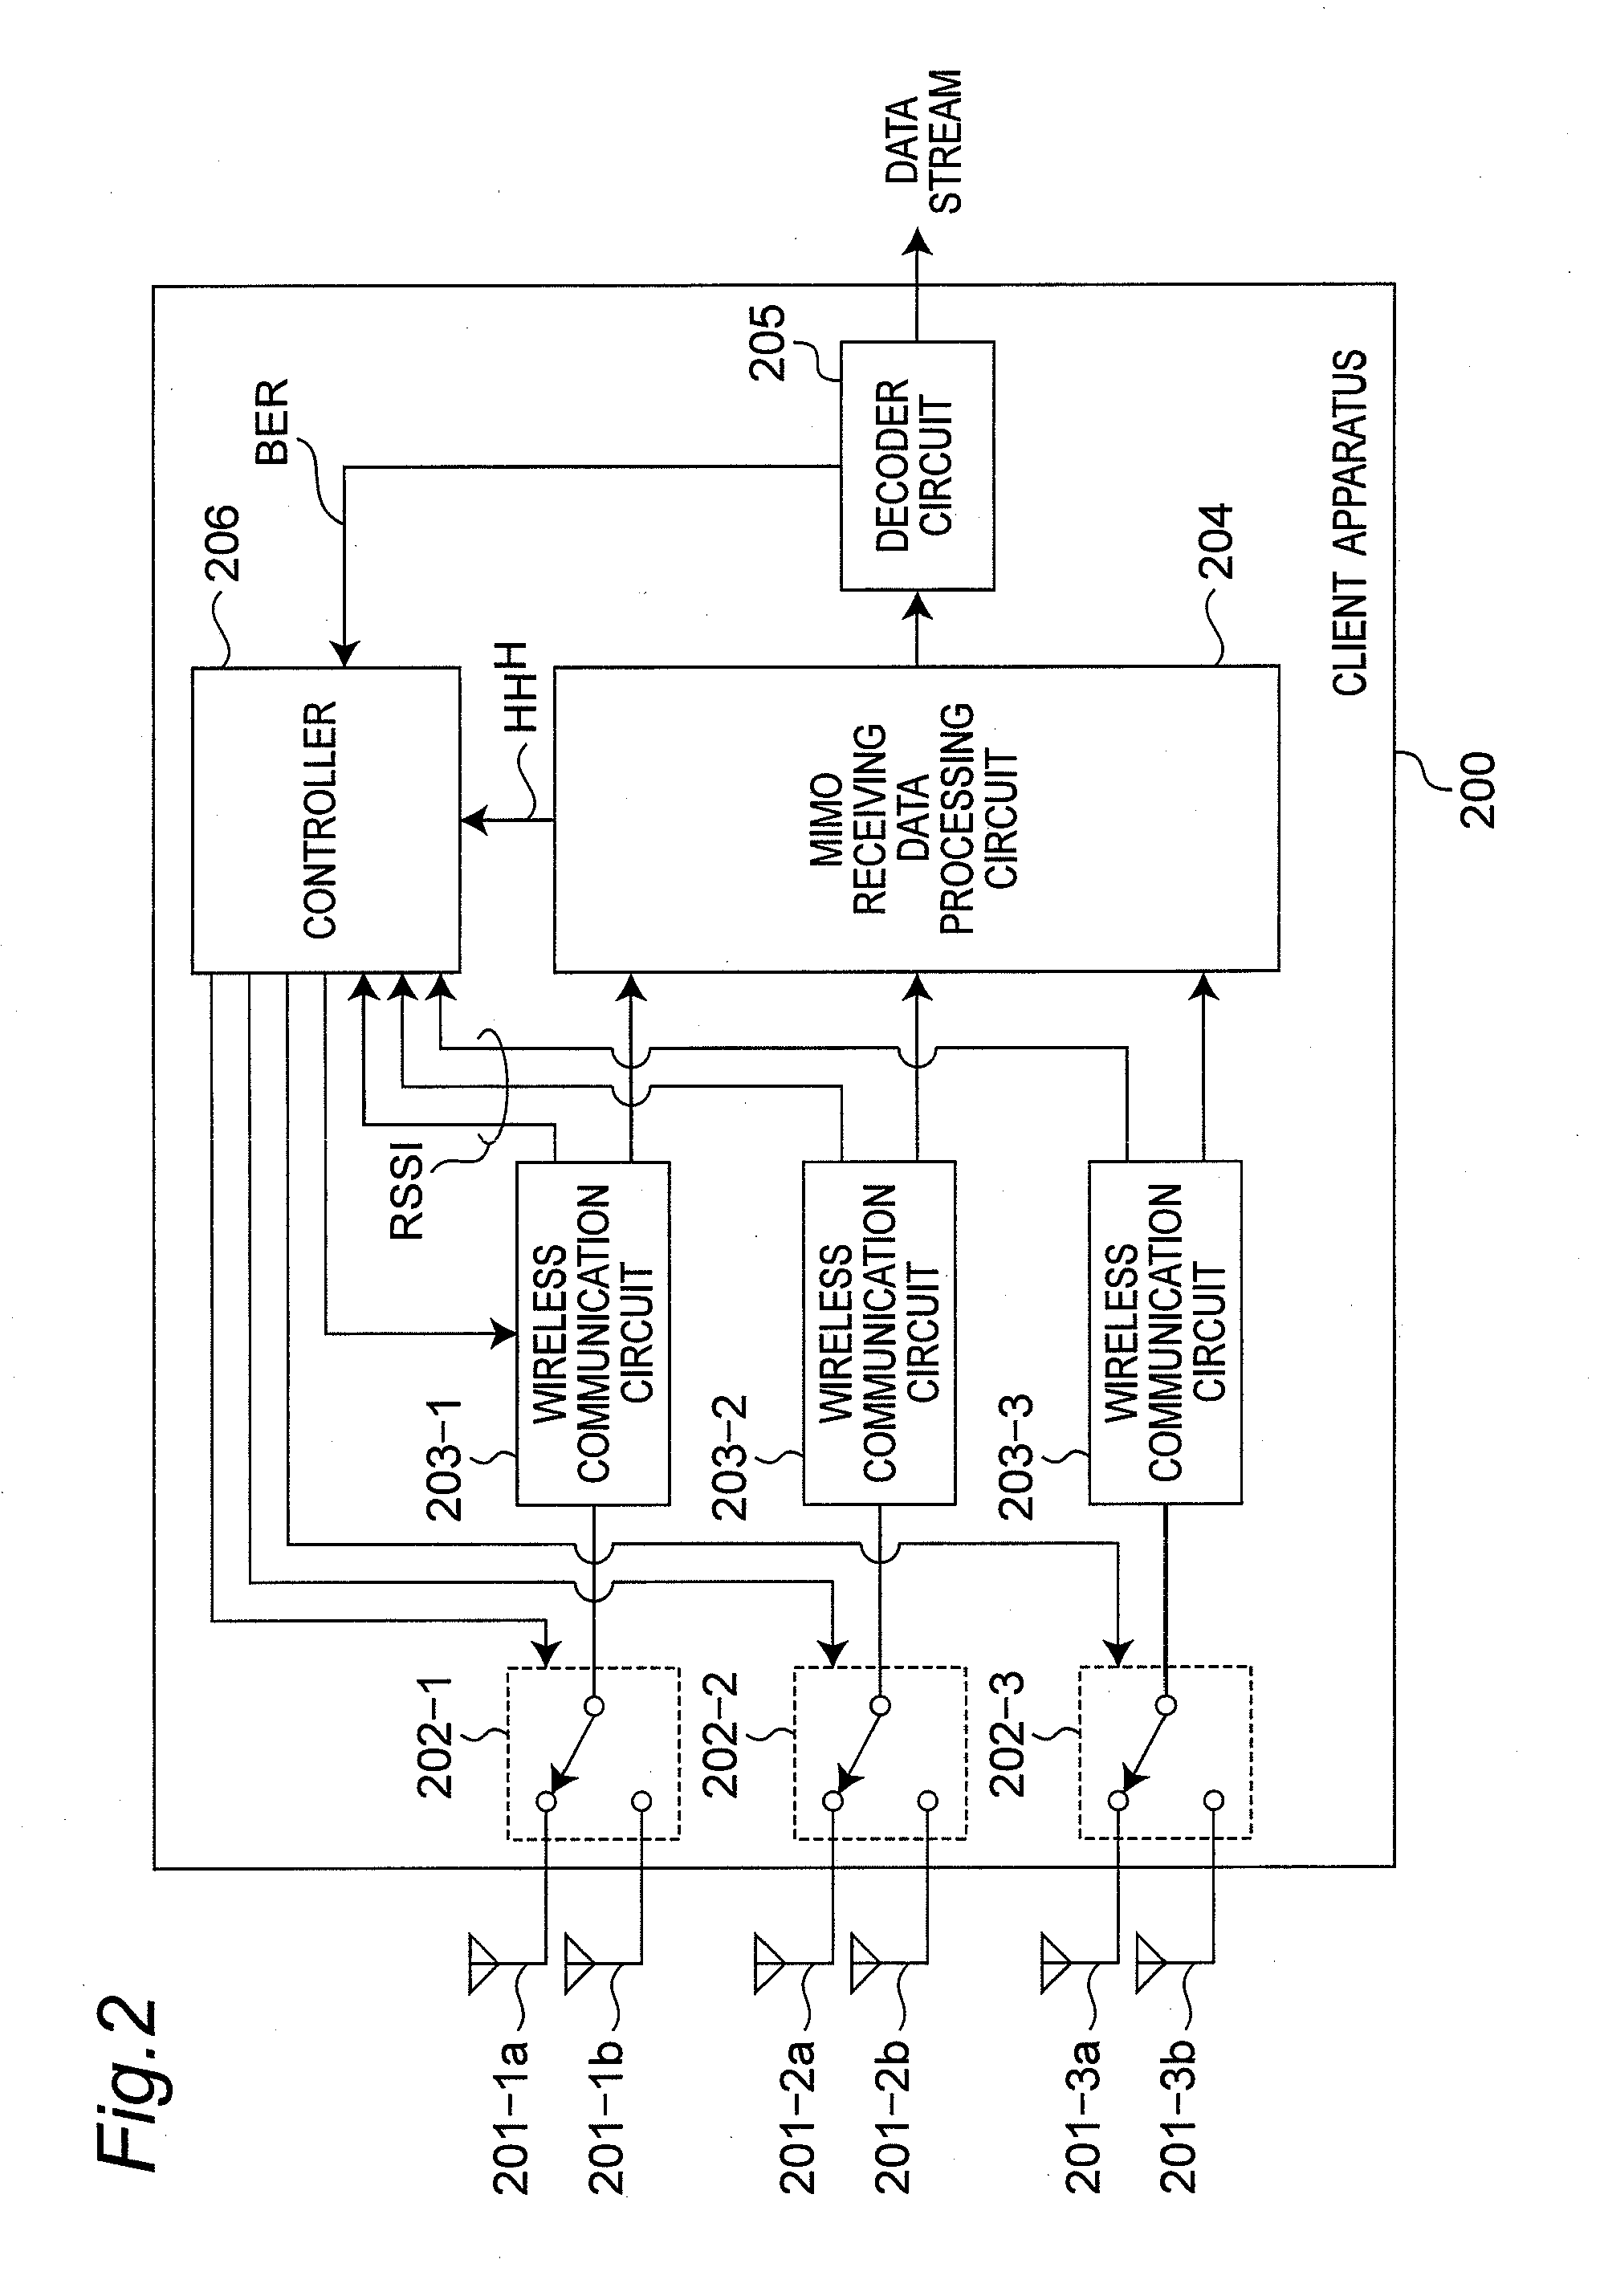 Wireless communication system having MIMO communication capability and having multiple receiving antennas to be selected